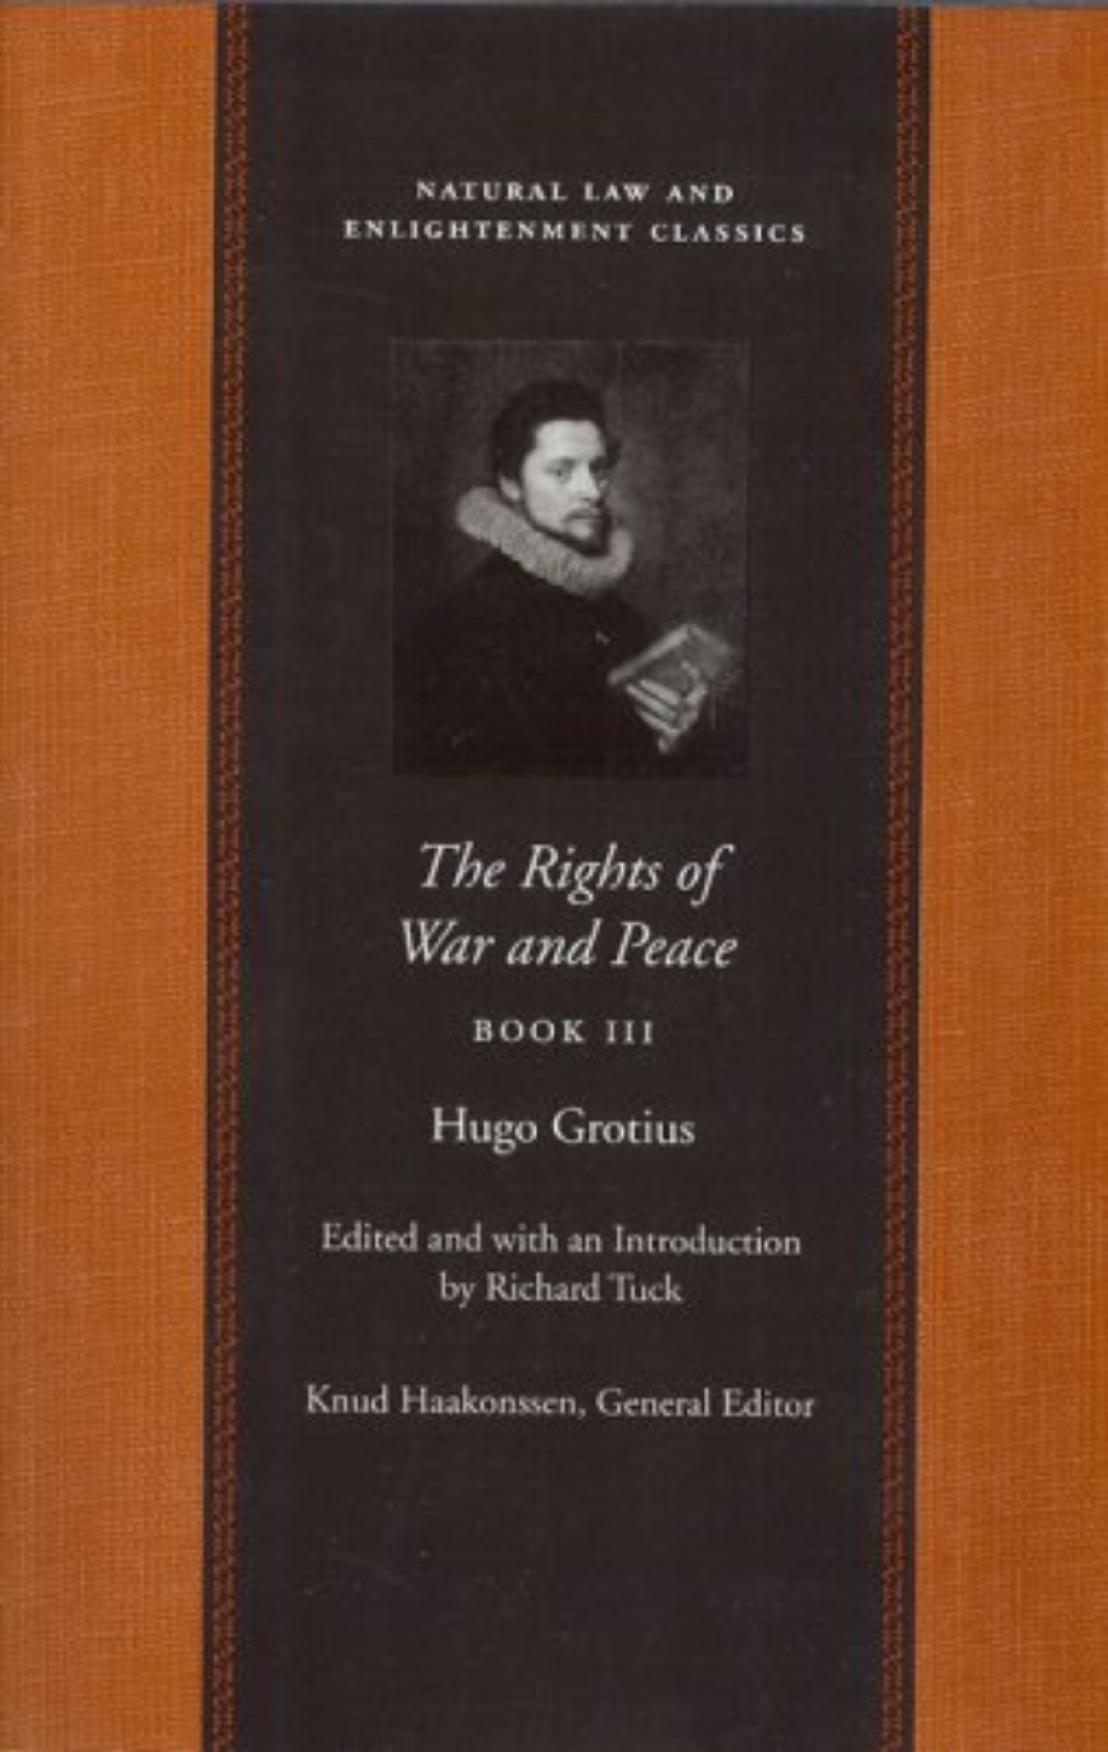 The Rights Of War And Peace